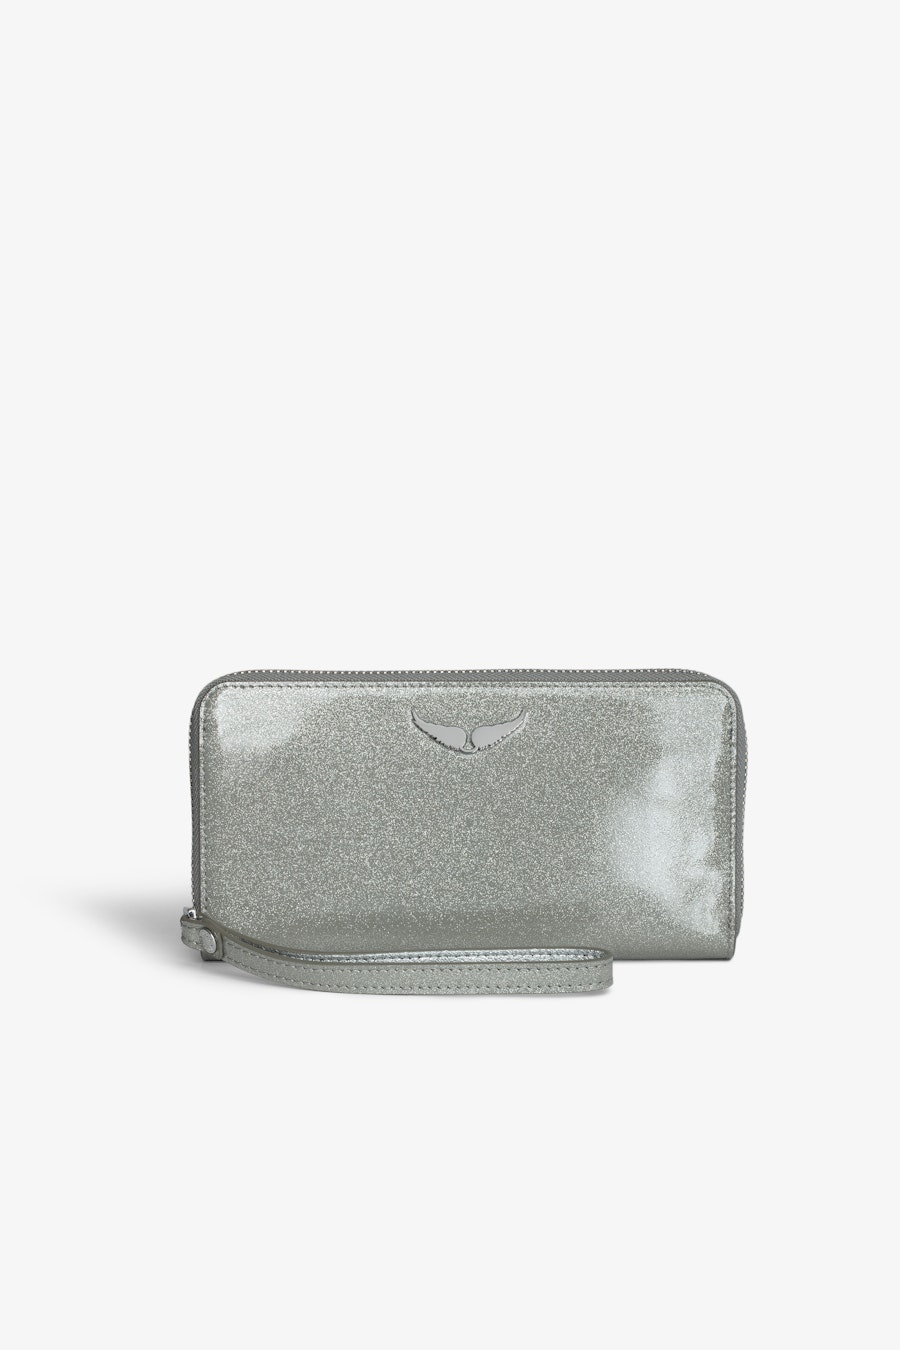 ZADIG&VOLTAIRE Compagnon Infinity Patent Wallet